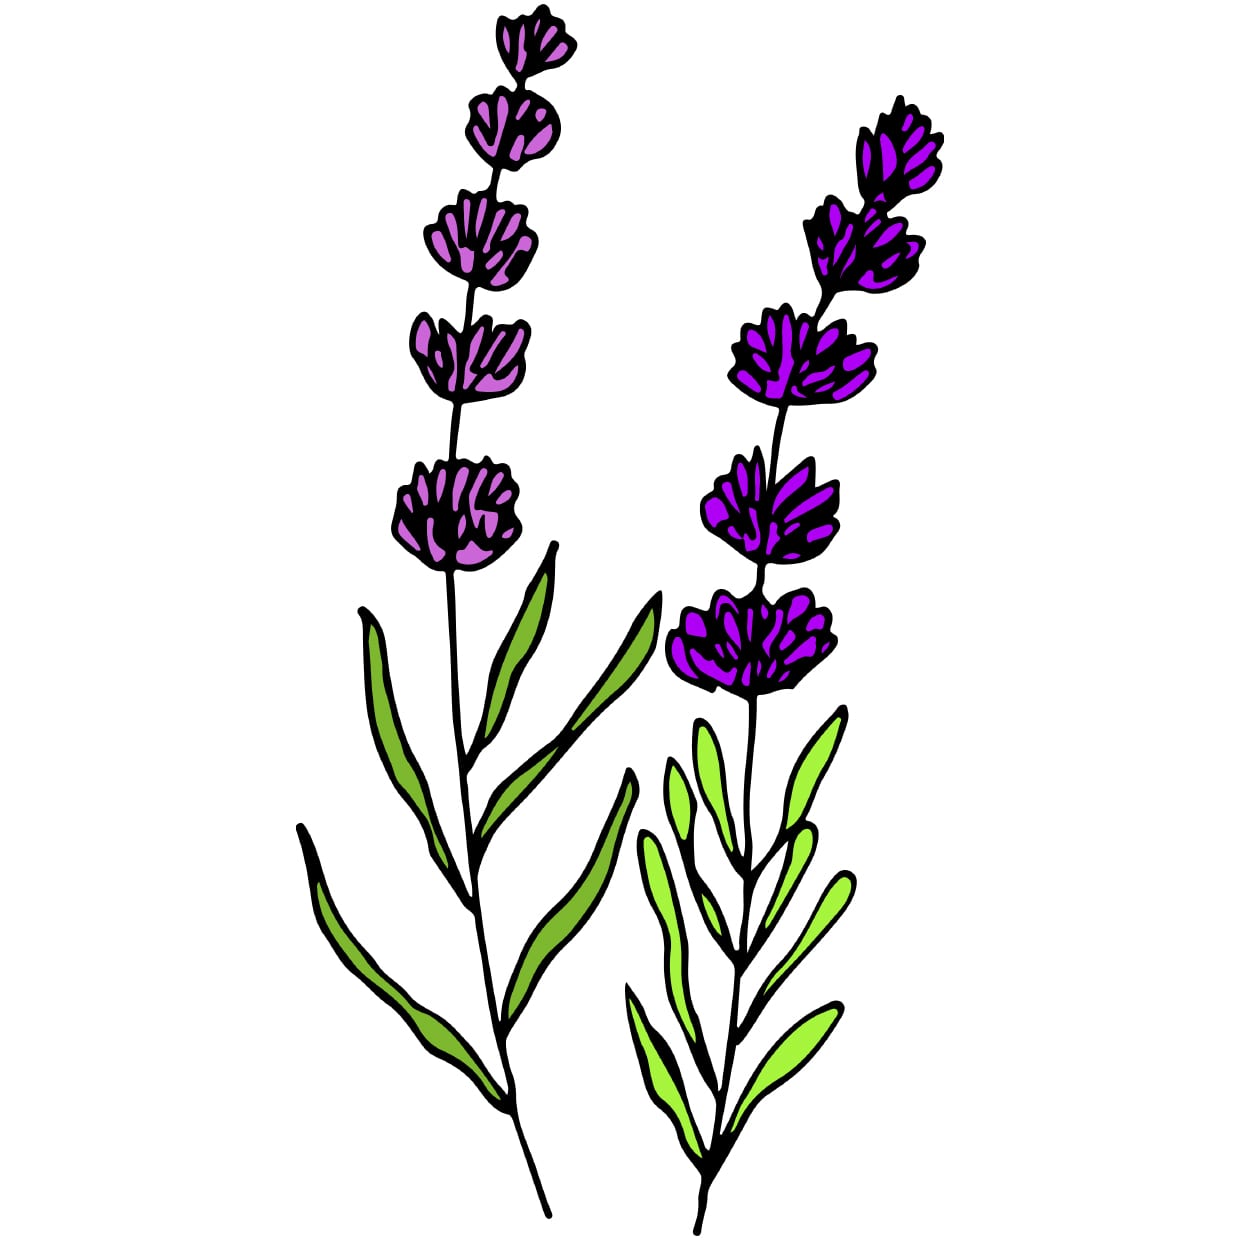 An illustration of a lavender plant.